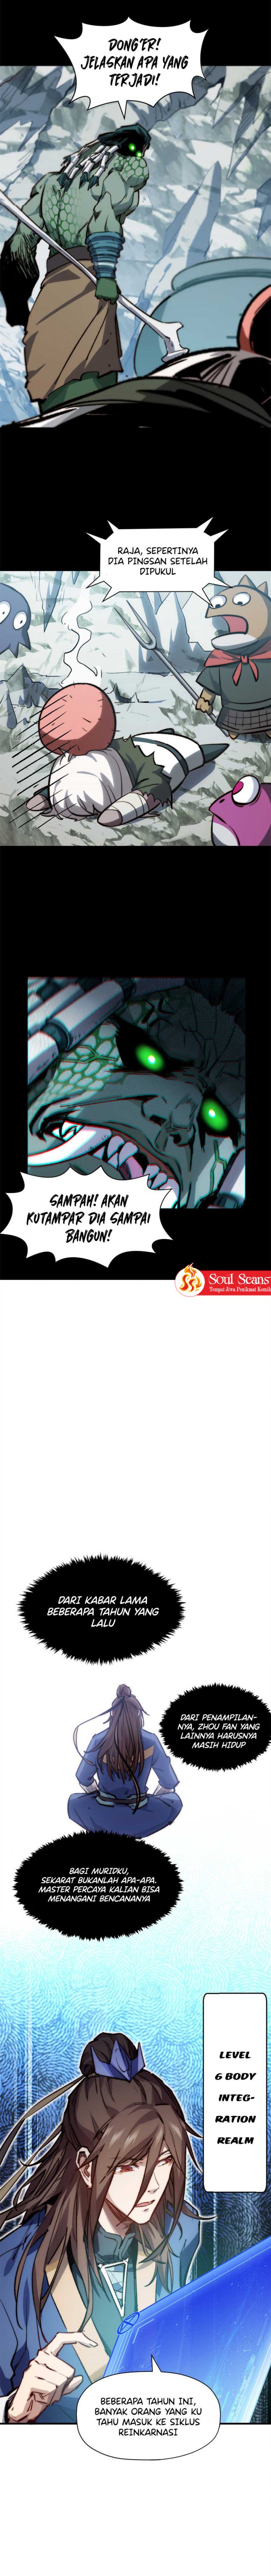 Dilarang COPAS - situs resmi www.mangacanblog.com - Komik top tier providence secretly cultivate for a thousand years 097 - chapter 97 98 Indonesia top tier providence secretly cultivate for a thousand years 097 - chapter 97 Terbaru 4|Baca Manga Komik Indonesia|Mangacan